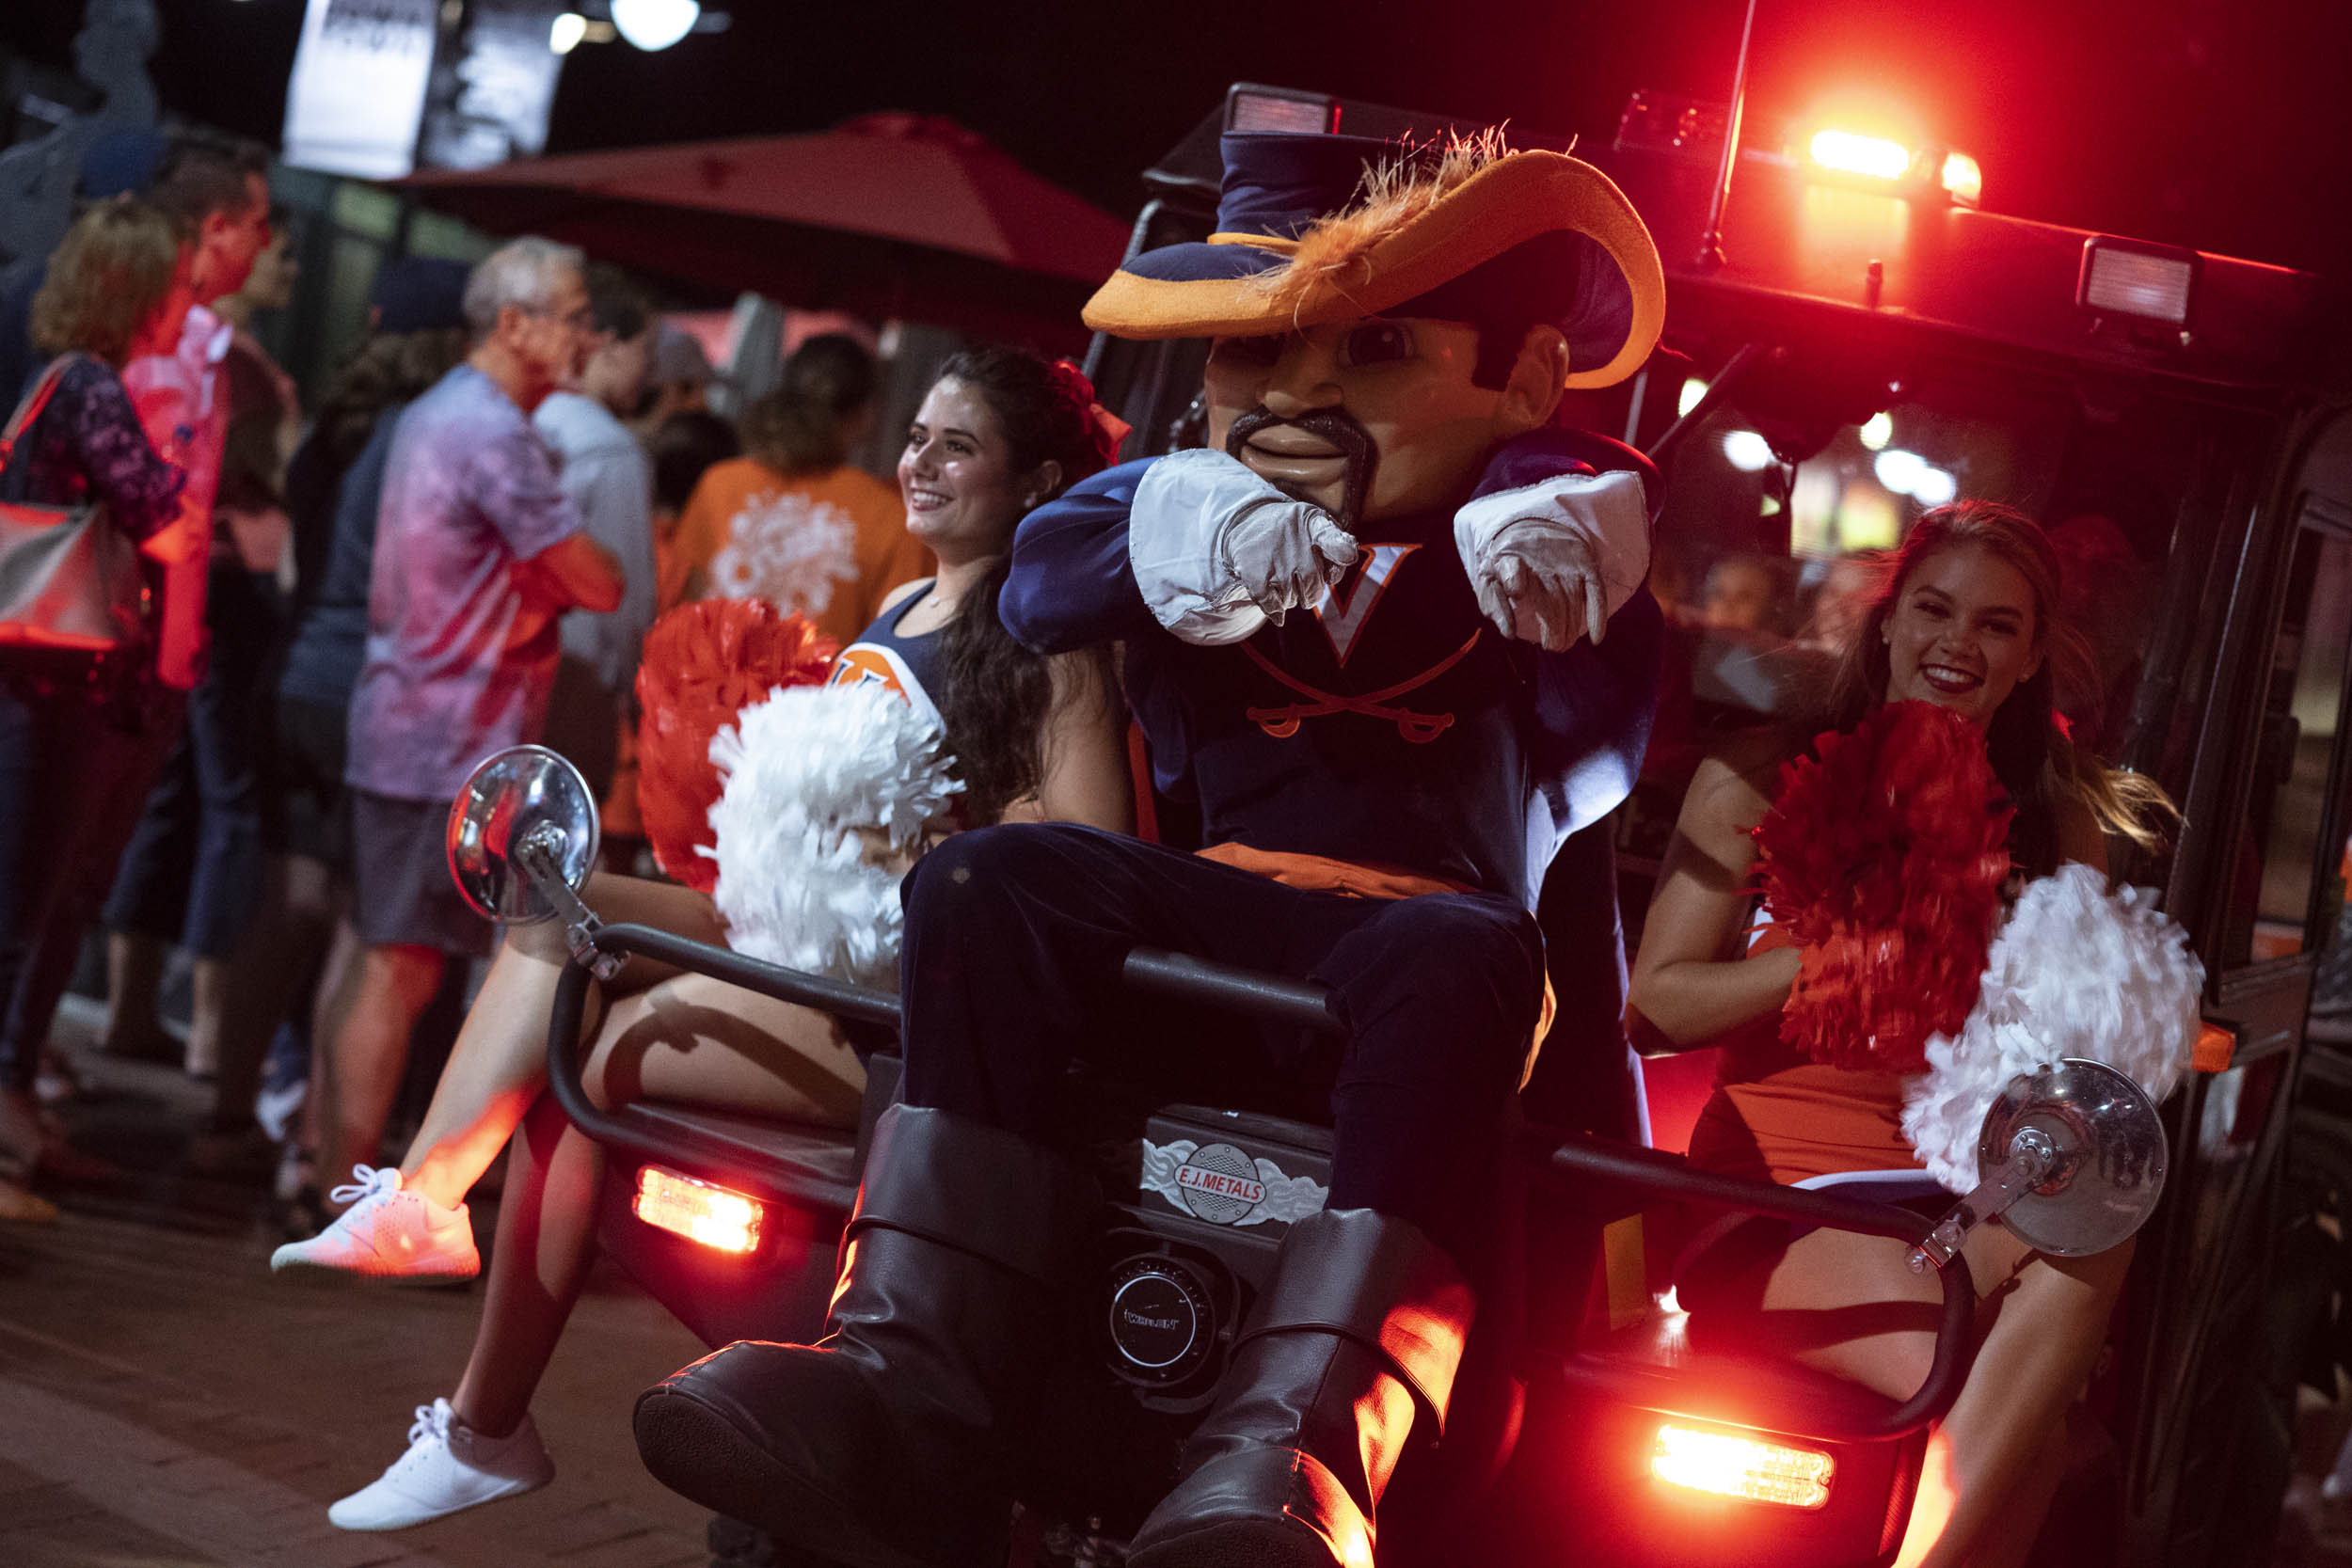 Cav Man sits on a golf cart with cheerleaders